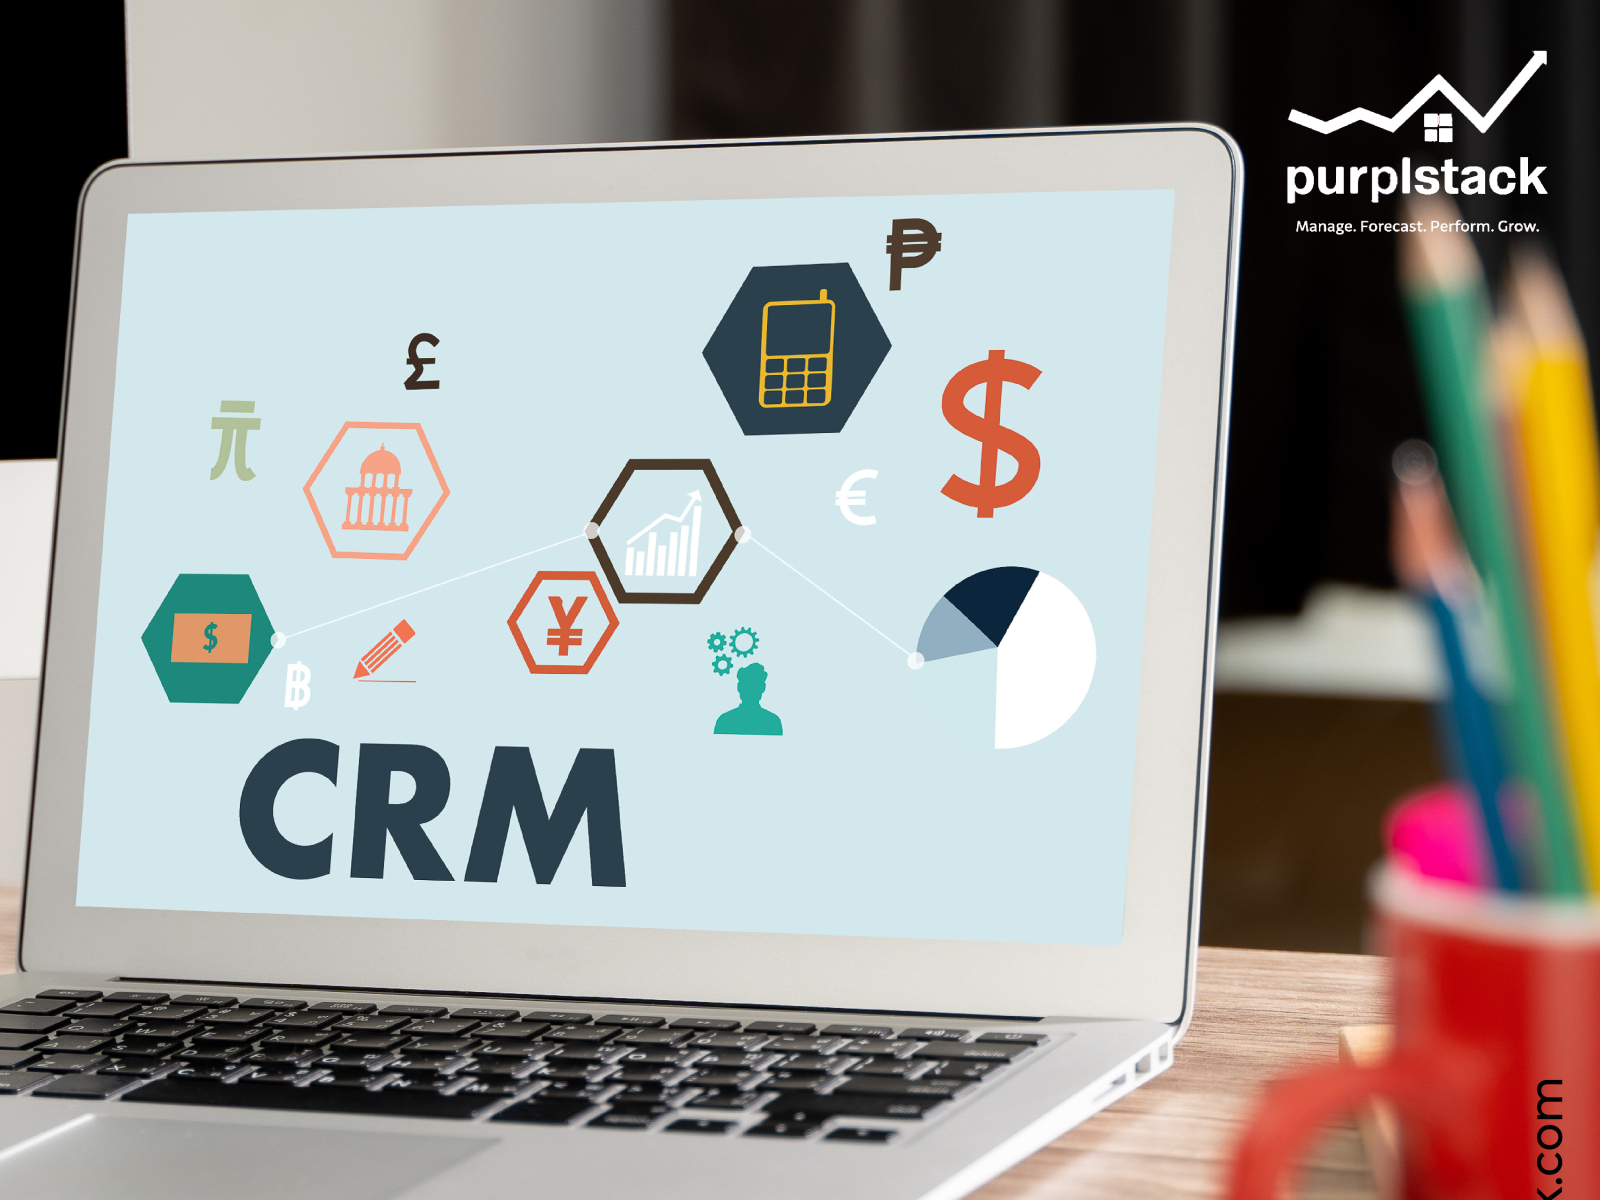 Top real estate CRM software | Purplestack CRM software by Purpl stack on Dribbble